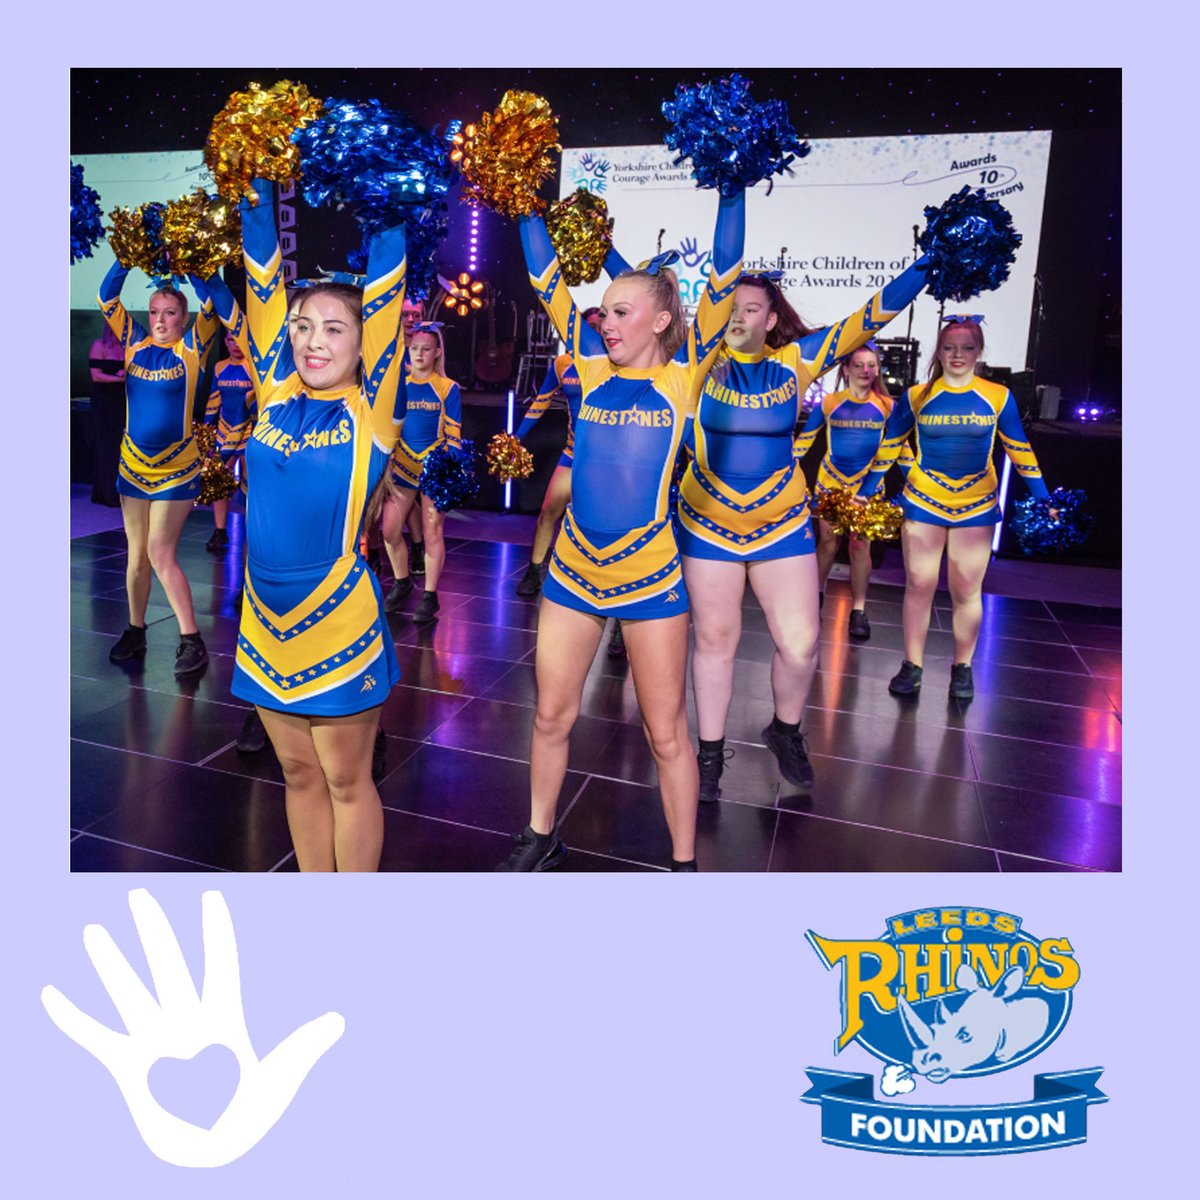 We are excited to announce that once again the Leeds Rhinos Foundation is supporting the Yorkshire Children of Courage Awards. The Leeds Rhinos Foundation is an integral part of the local community and their continued support plays a huge part in enabling us to put on our event!